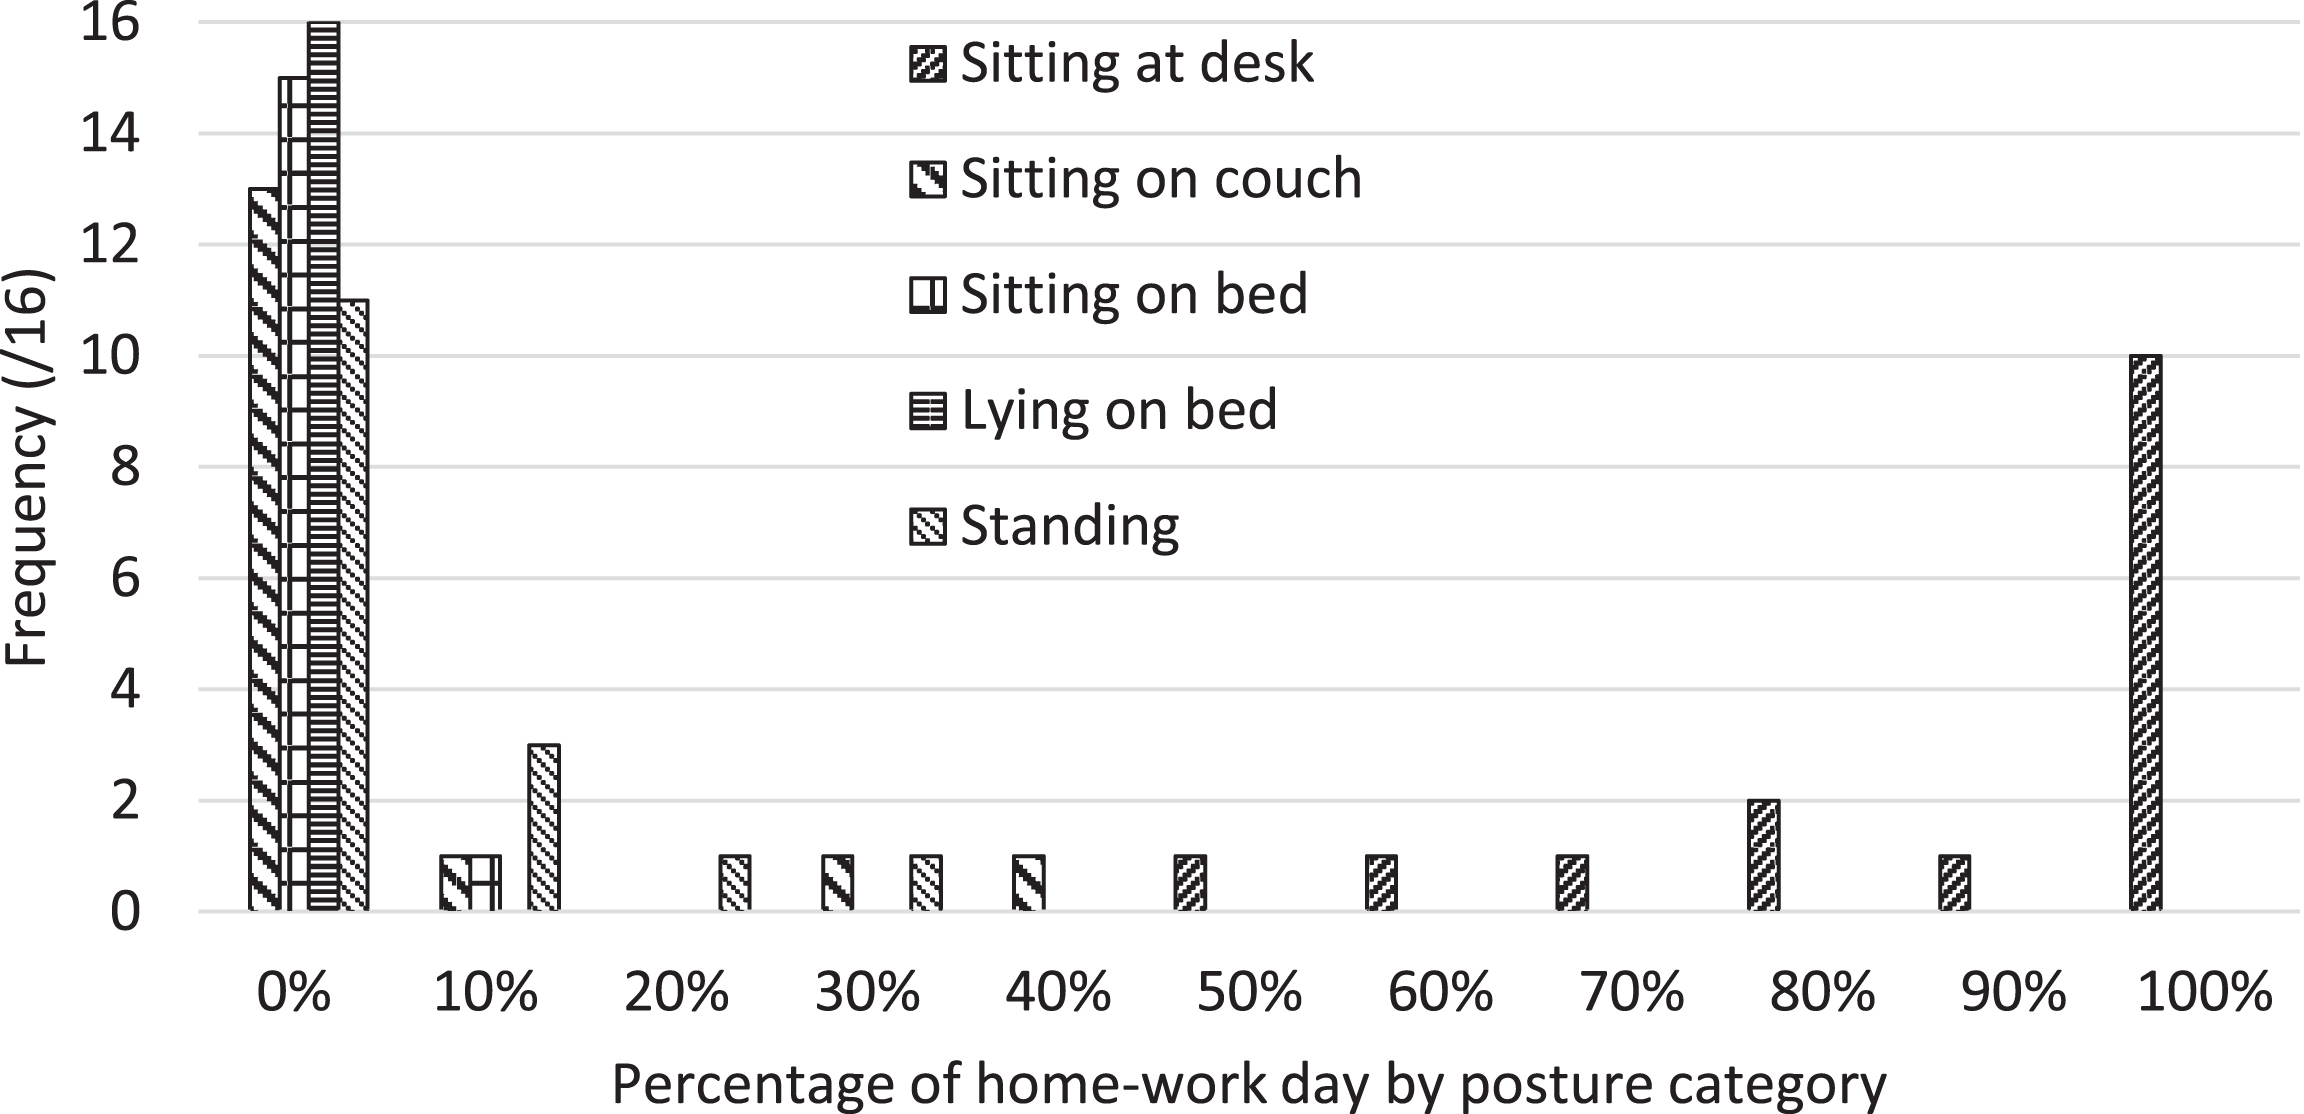 Distribution of working posturesover typical home-work day across respondent population.